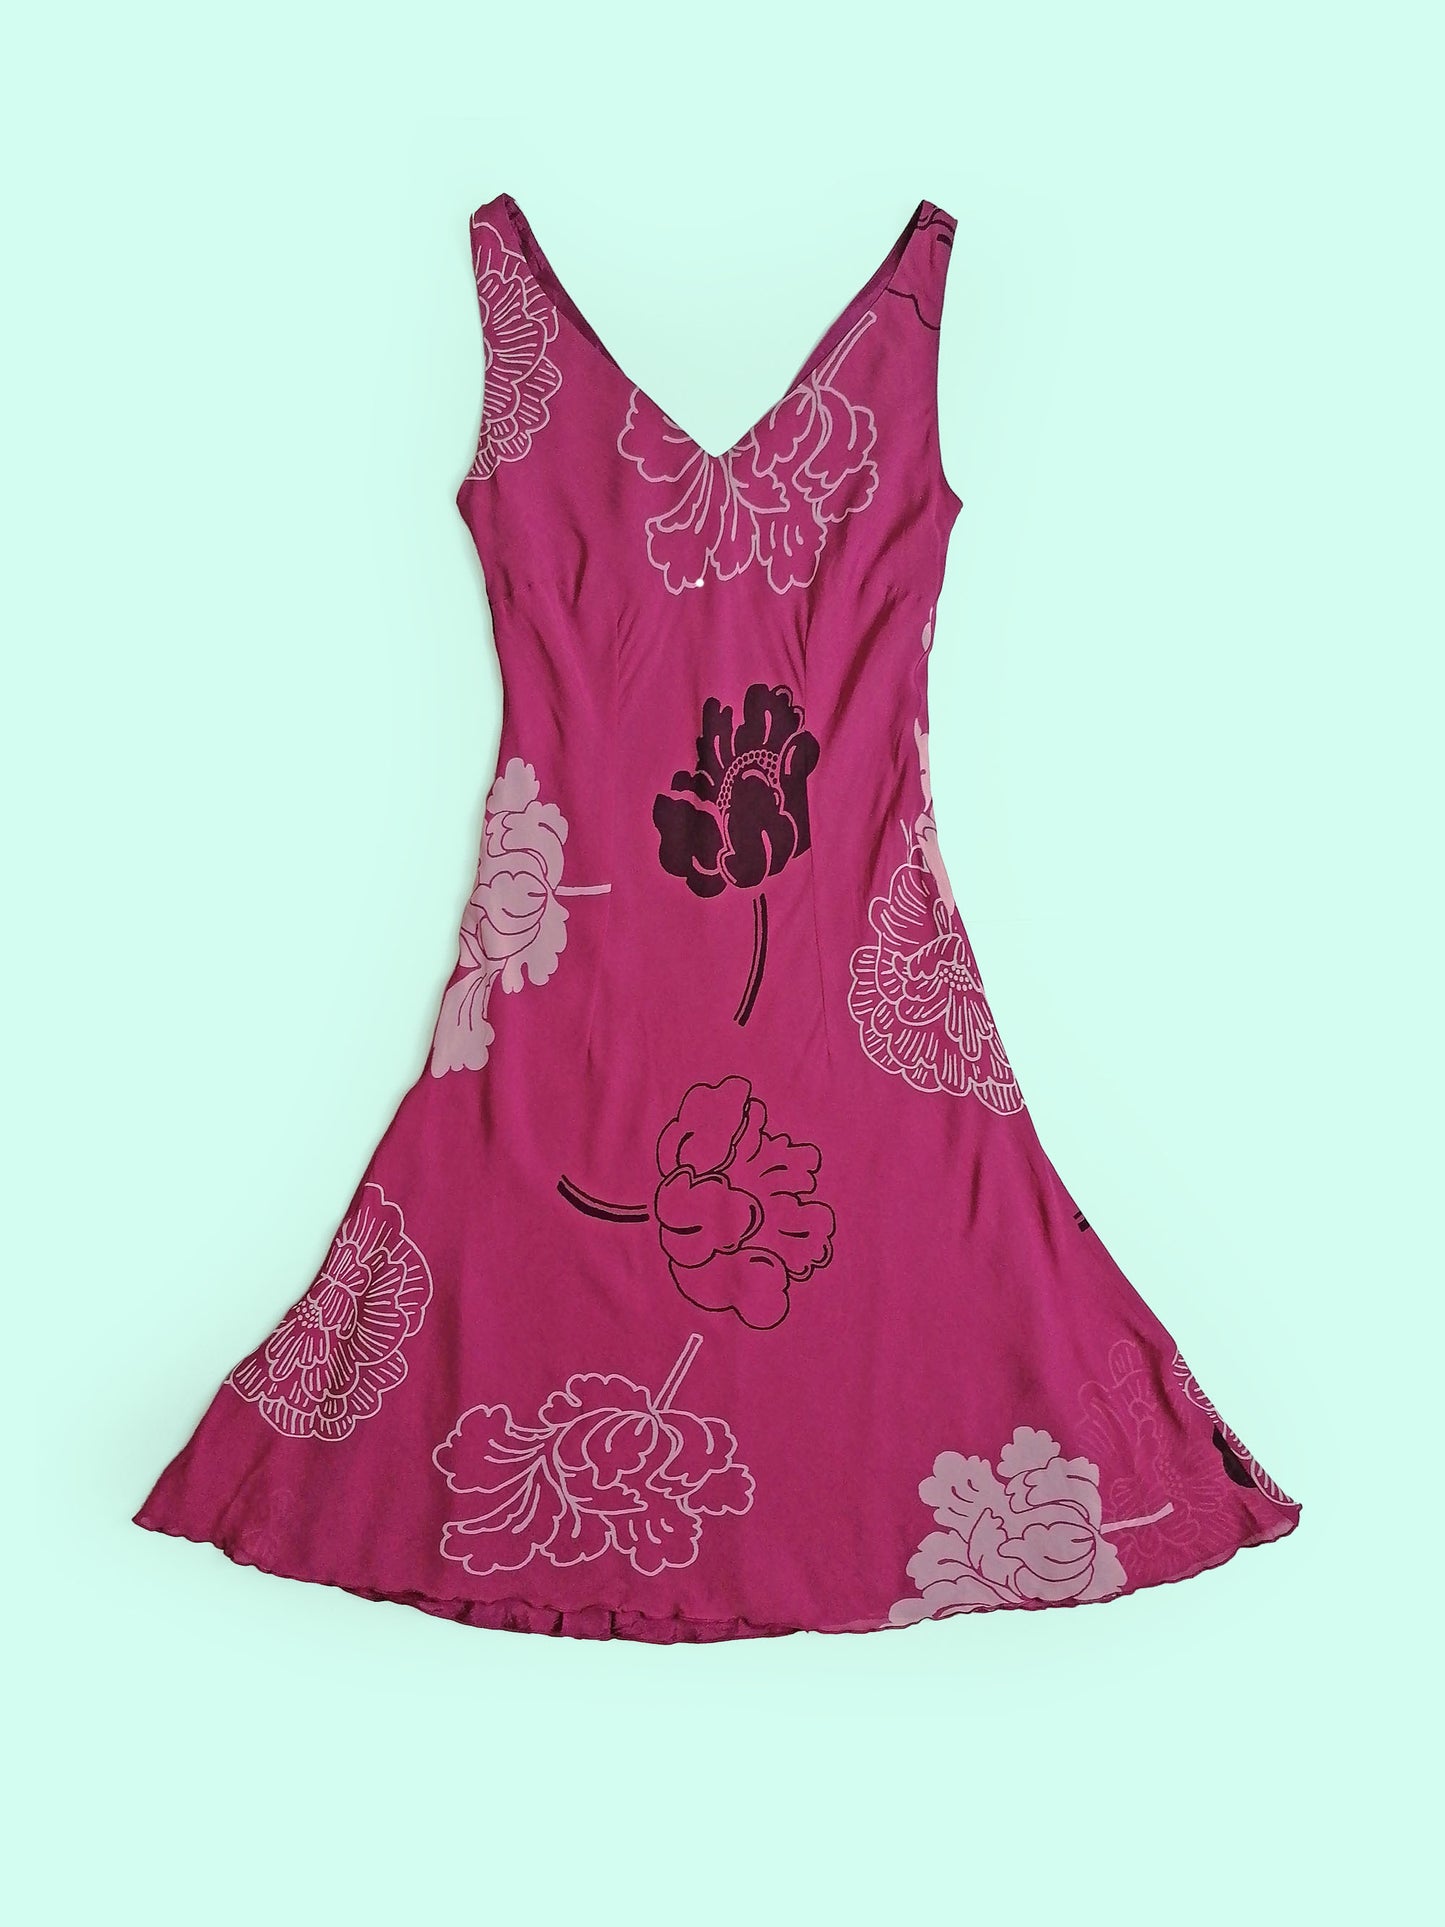 S. OLIVER Dress Dusty Rose Pink Big Flowers - size XS-S / 36